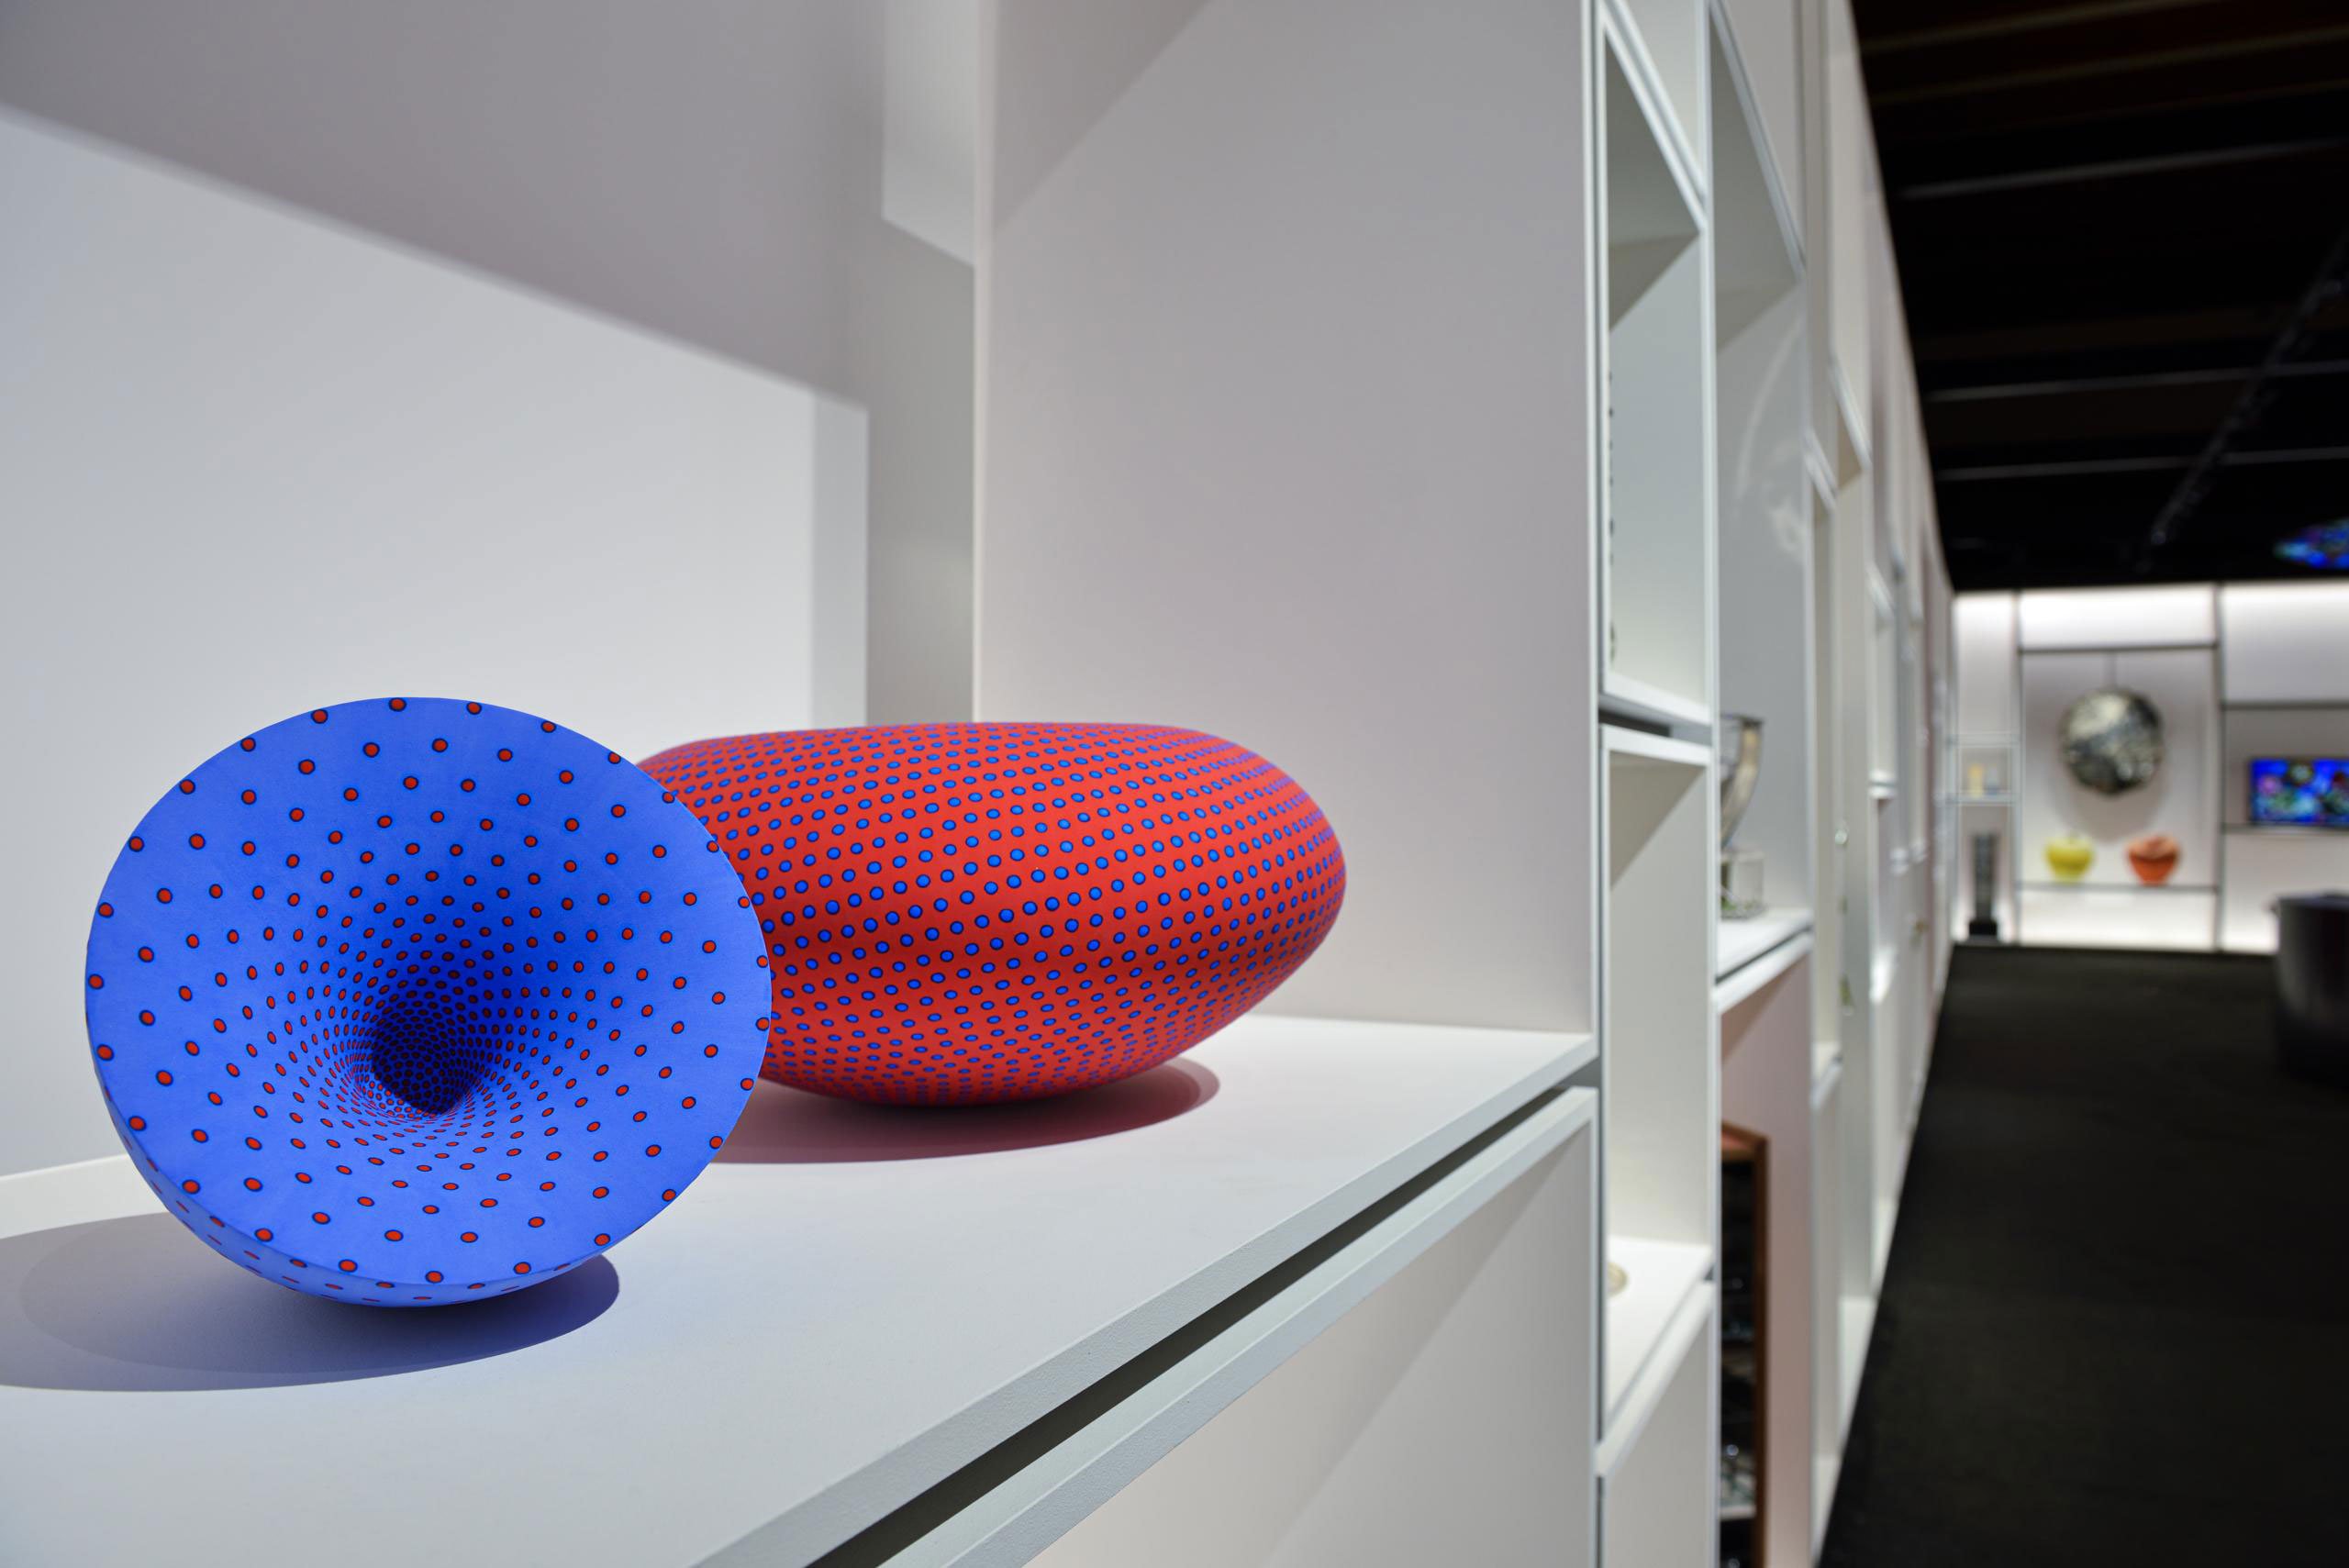 Red Bindu Form (2022) &amp; Vortex (2022) by Grainne Watts. "Next of Europe" installation at Homo Faber by Jean Blanchaert and Stefano Boeri. Photography by Lola Moser © Michelangelo Foundation.